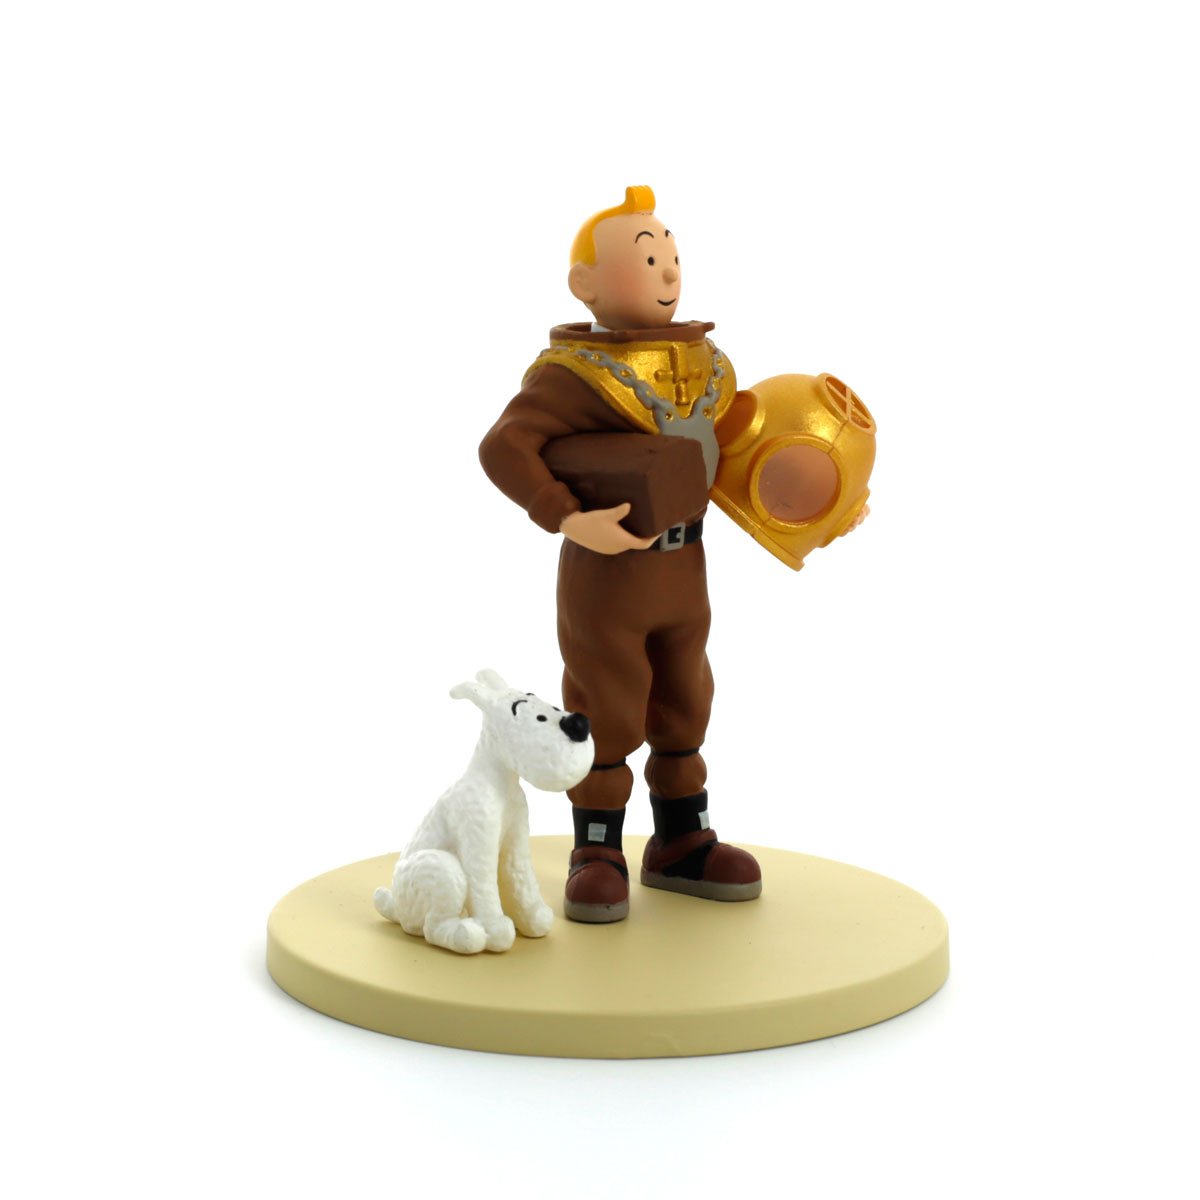 TINTIN DIVER IN SCAPHANDRE SUIT POLYRESIN FIGURINE NEW  OFFICIAL TINTIN PRODUCT 